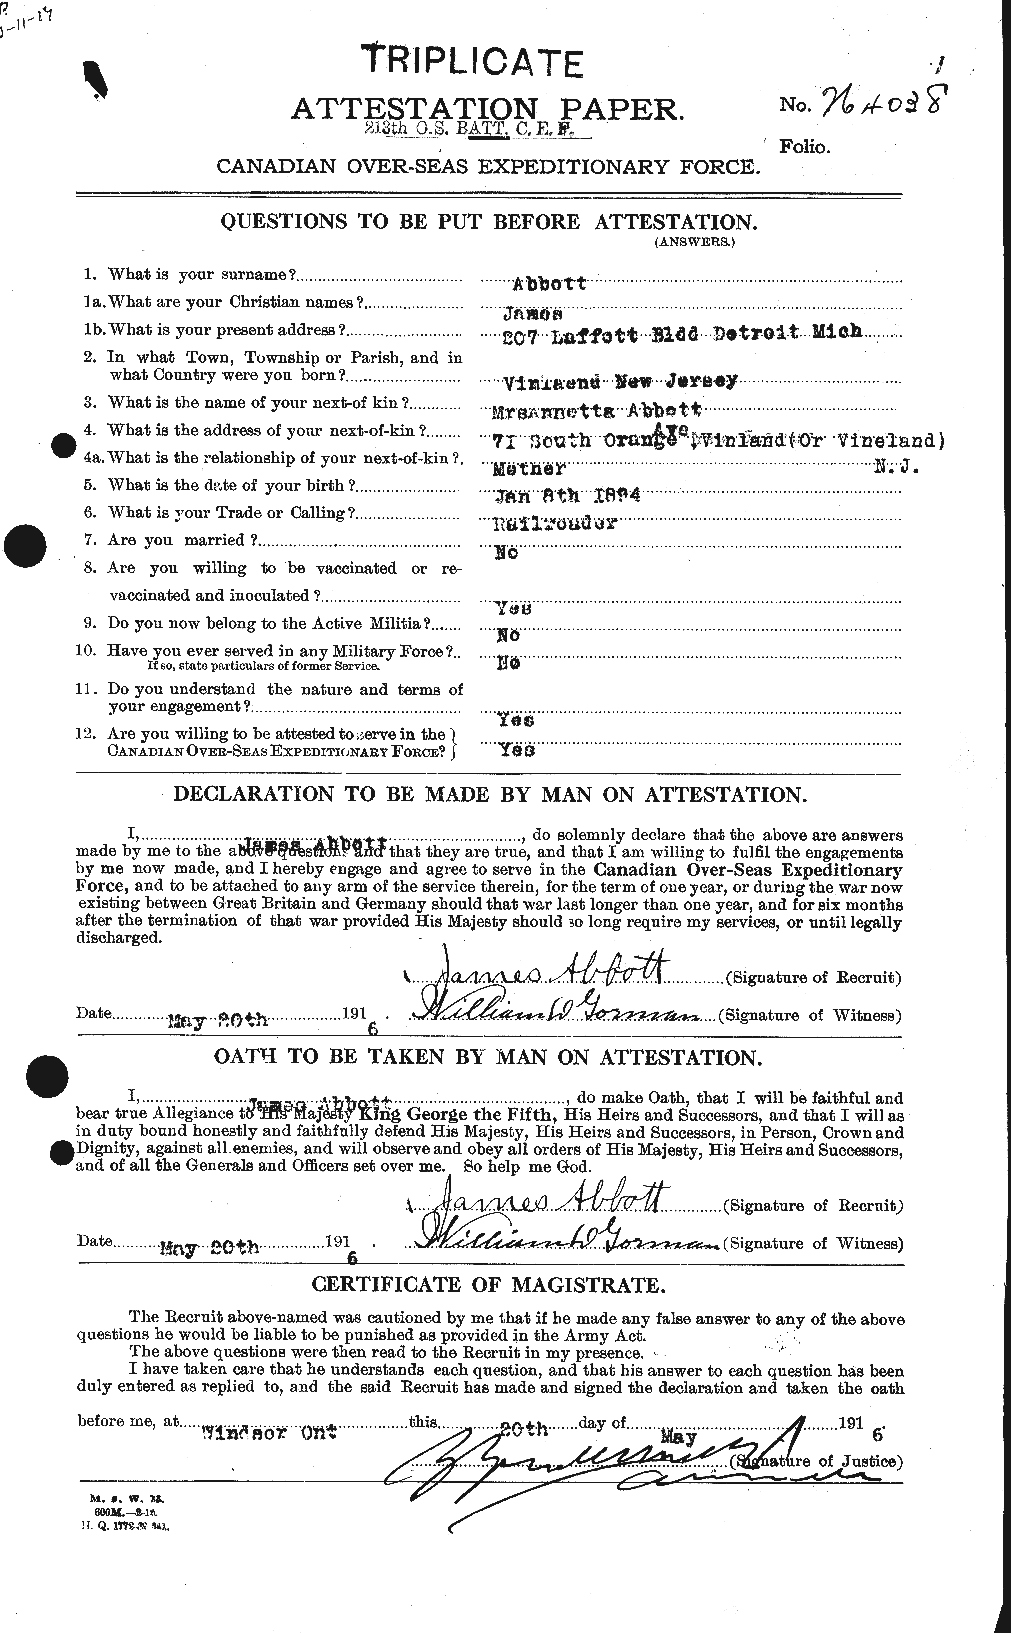 Personnel Records of the First World War - CEF 200980a